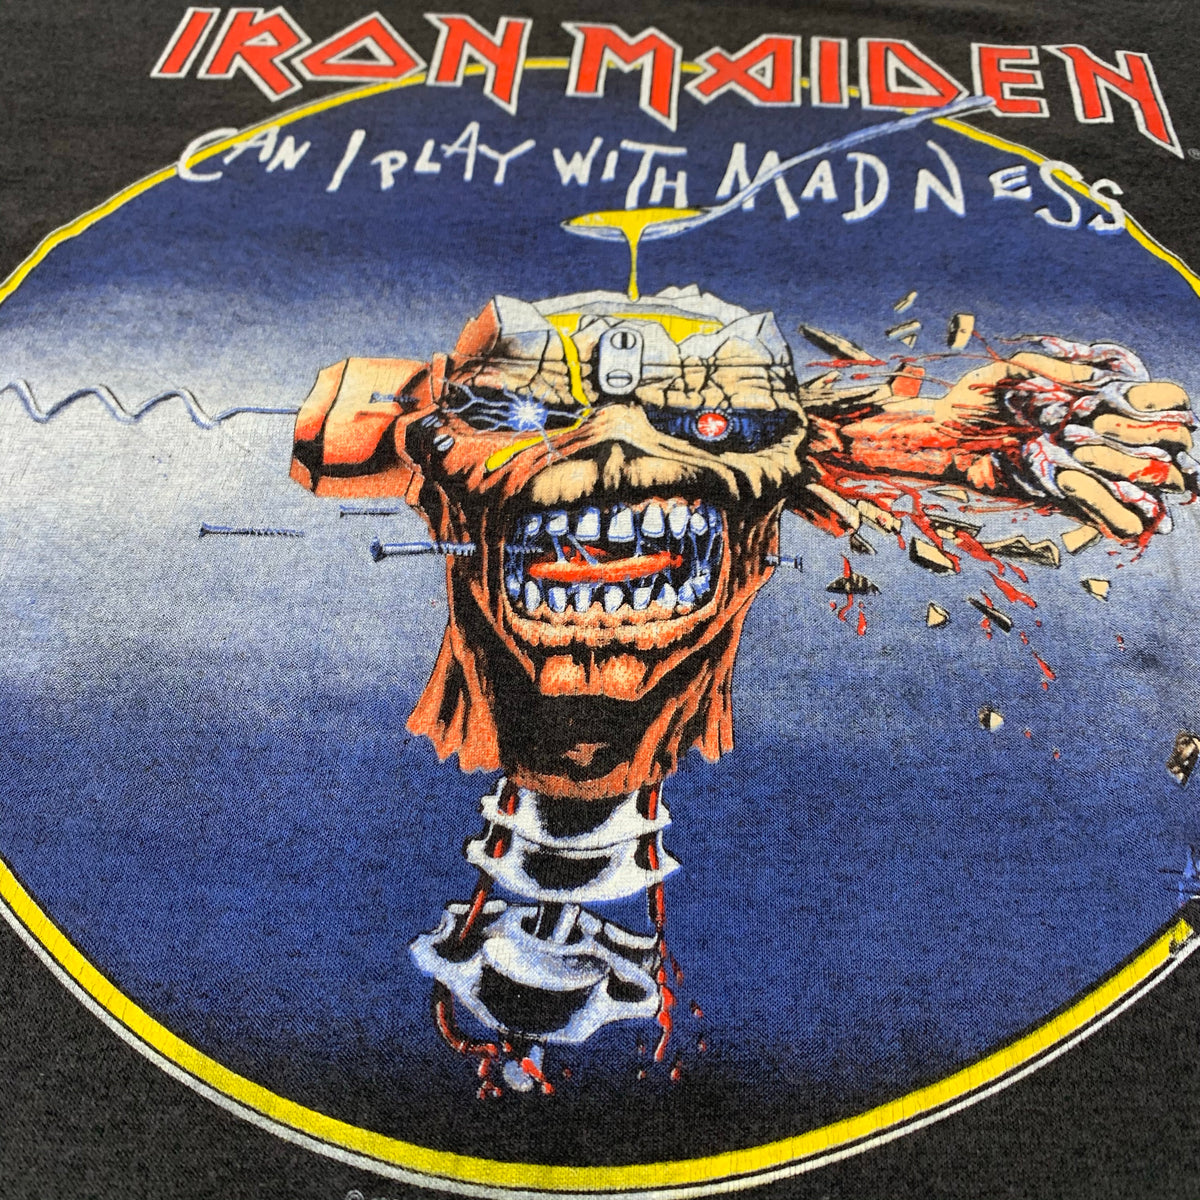 Vintage Iron Maiden “Can I Play With Madness” T-Shirt